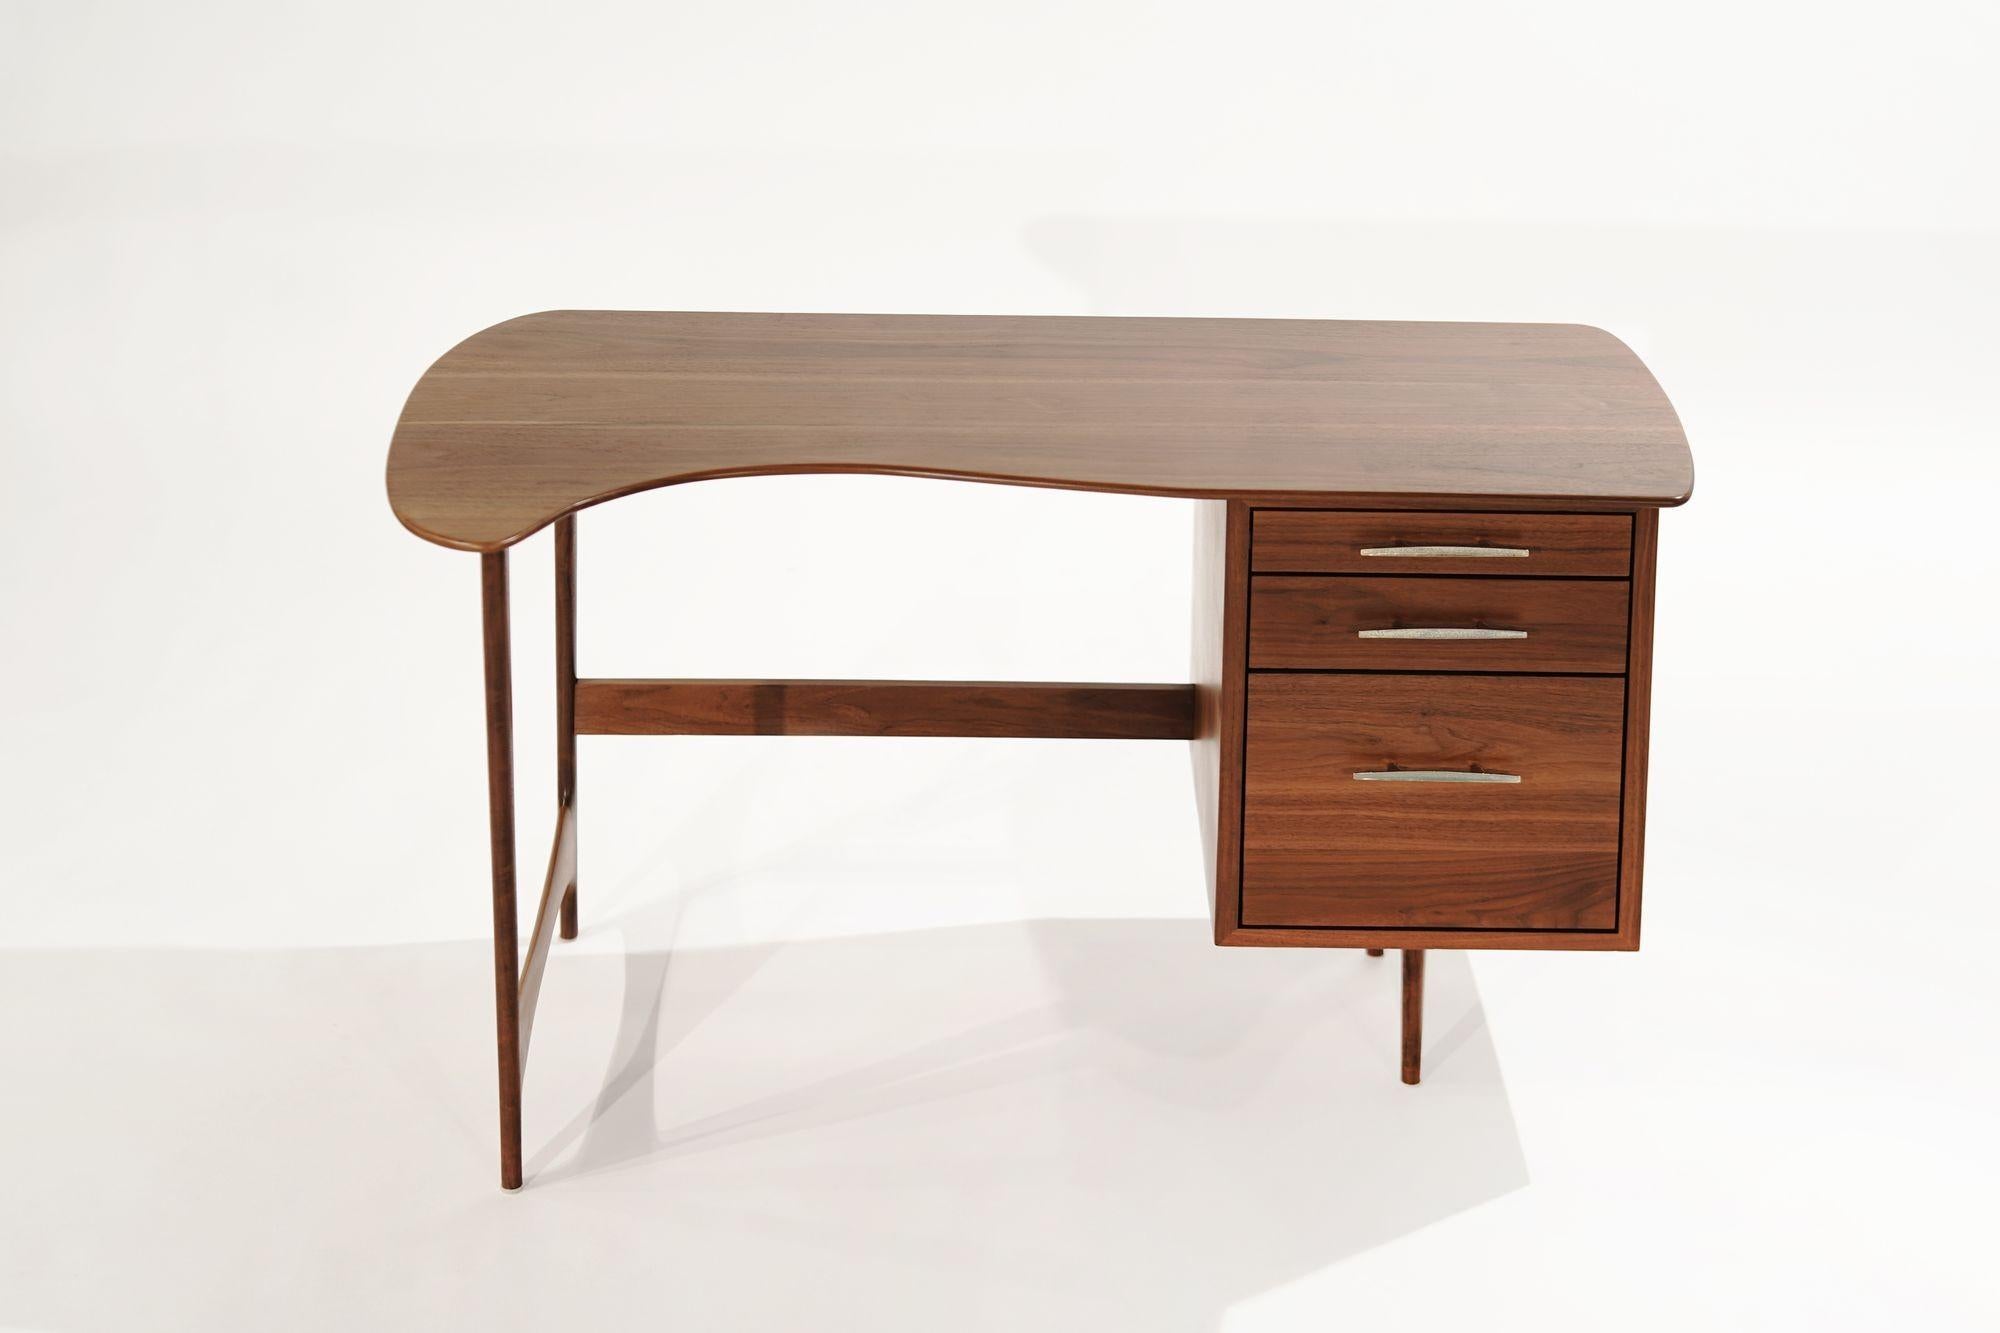 Sculptural walnut desk original from Denmark, circa 1950-1959. Featuring three drawers providing excellent document storage, but the real beauty of this piece is its swooping curves and sudden edges. The impeccable finish highlights the walnut grain